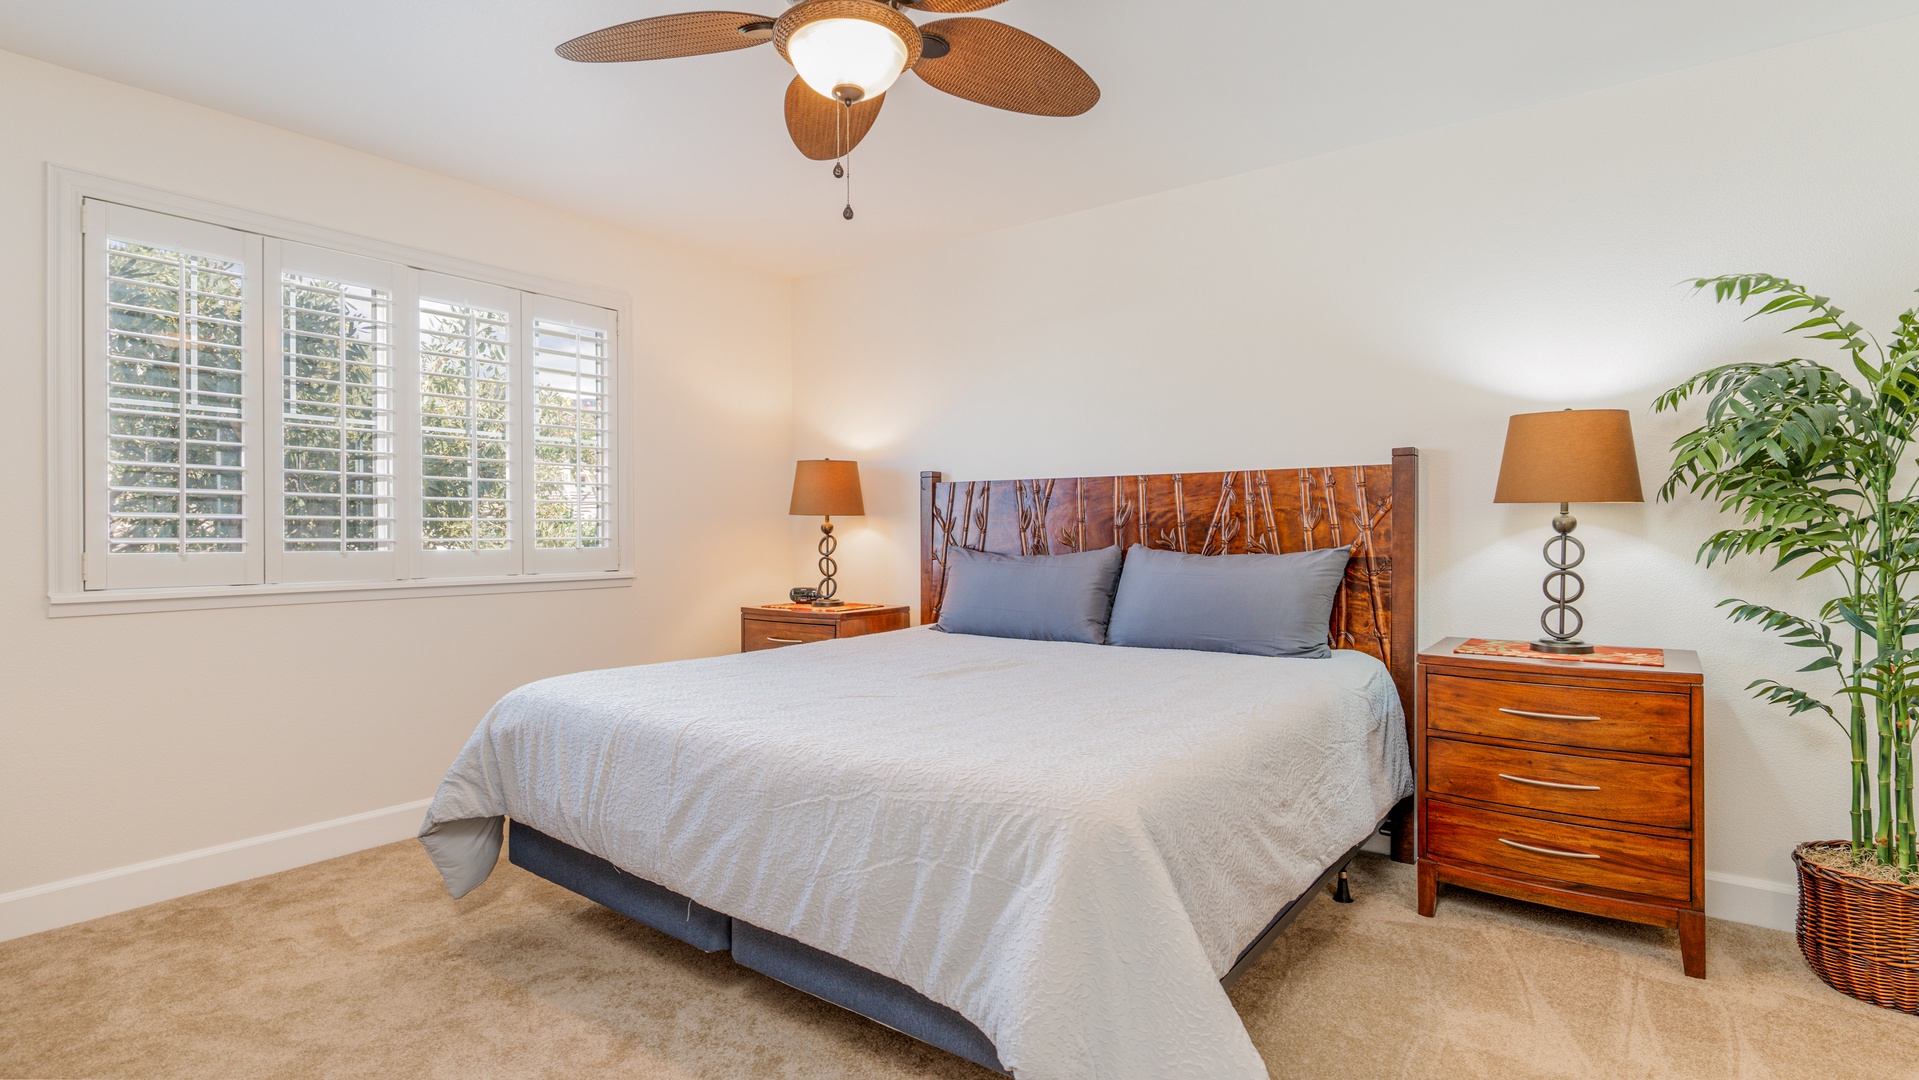 Kapolei Vacation Rentals, Ko Olina Kai 1057B - The primary guest bedroom with a ceiling fan and scenery.